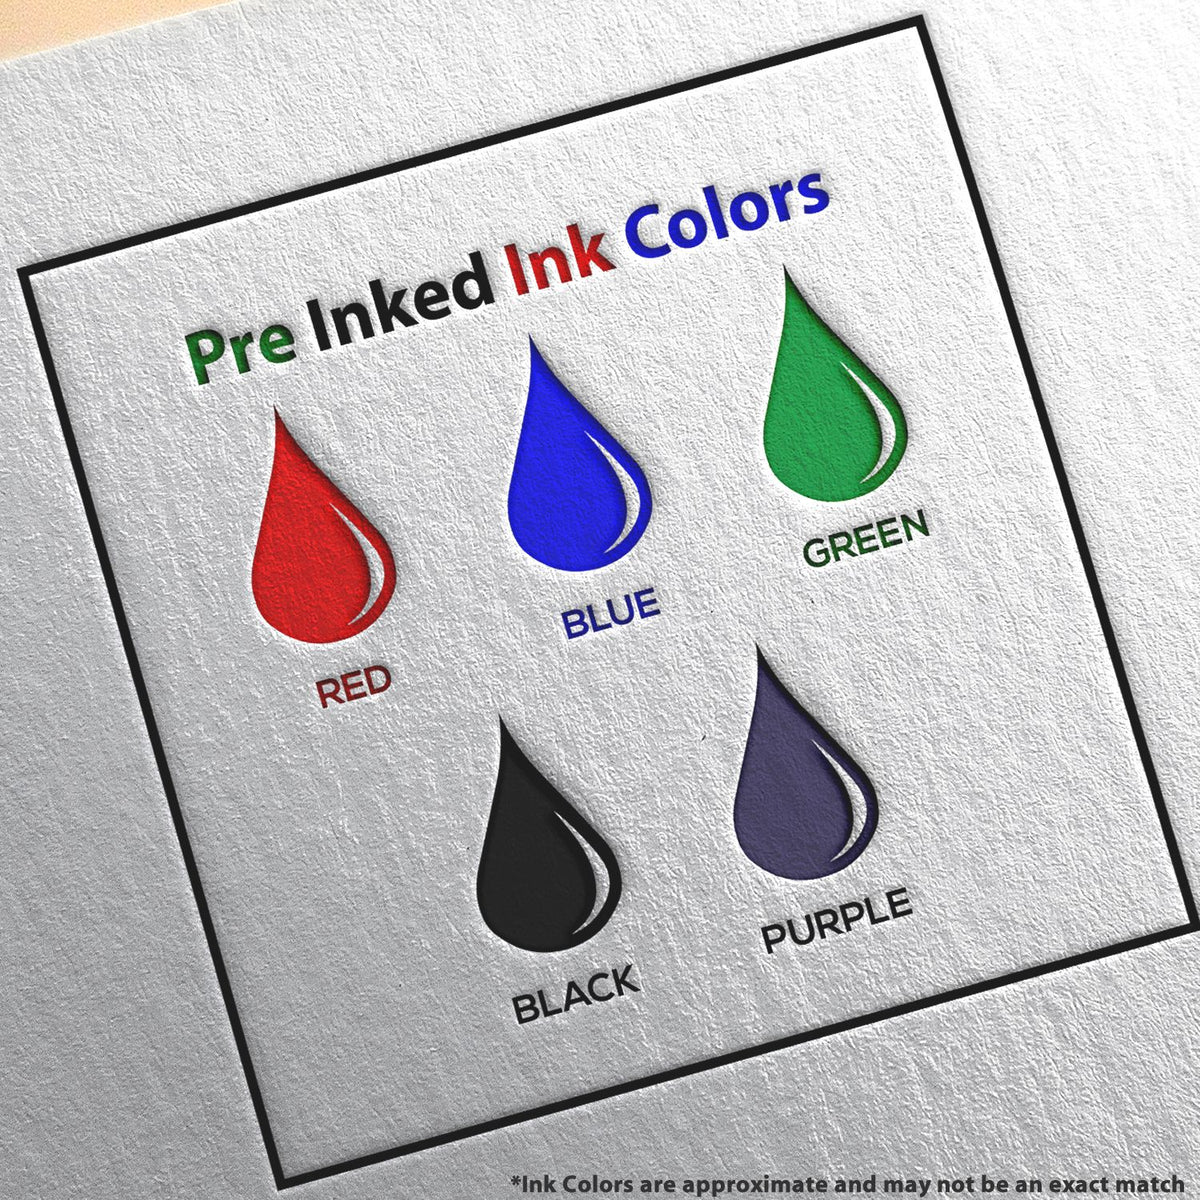 A picture showing the different ink colors or hues available for the Slim Pre-Inked Montana Landscape Architect Seal Stamp product.